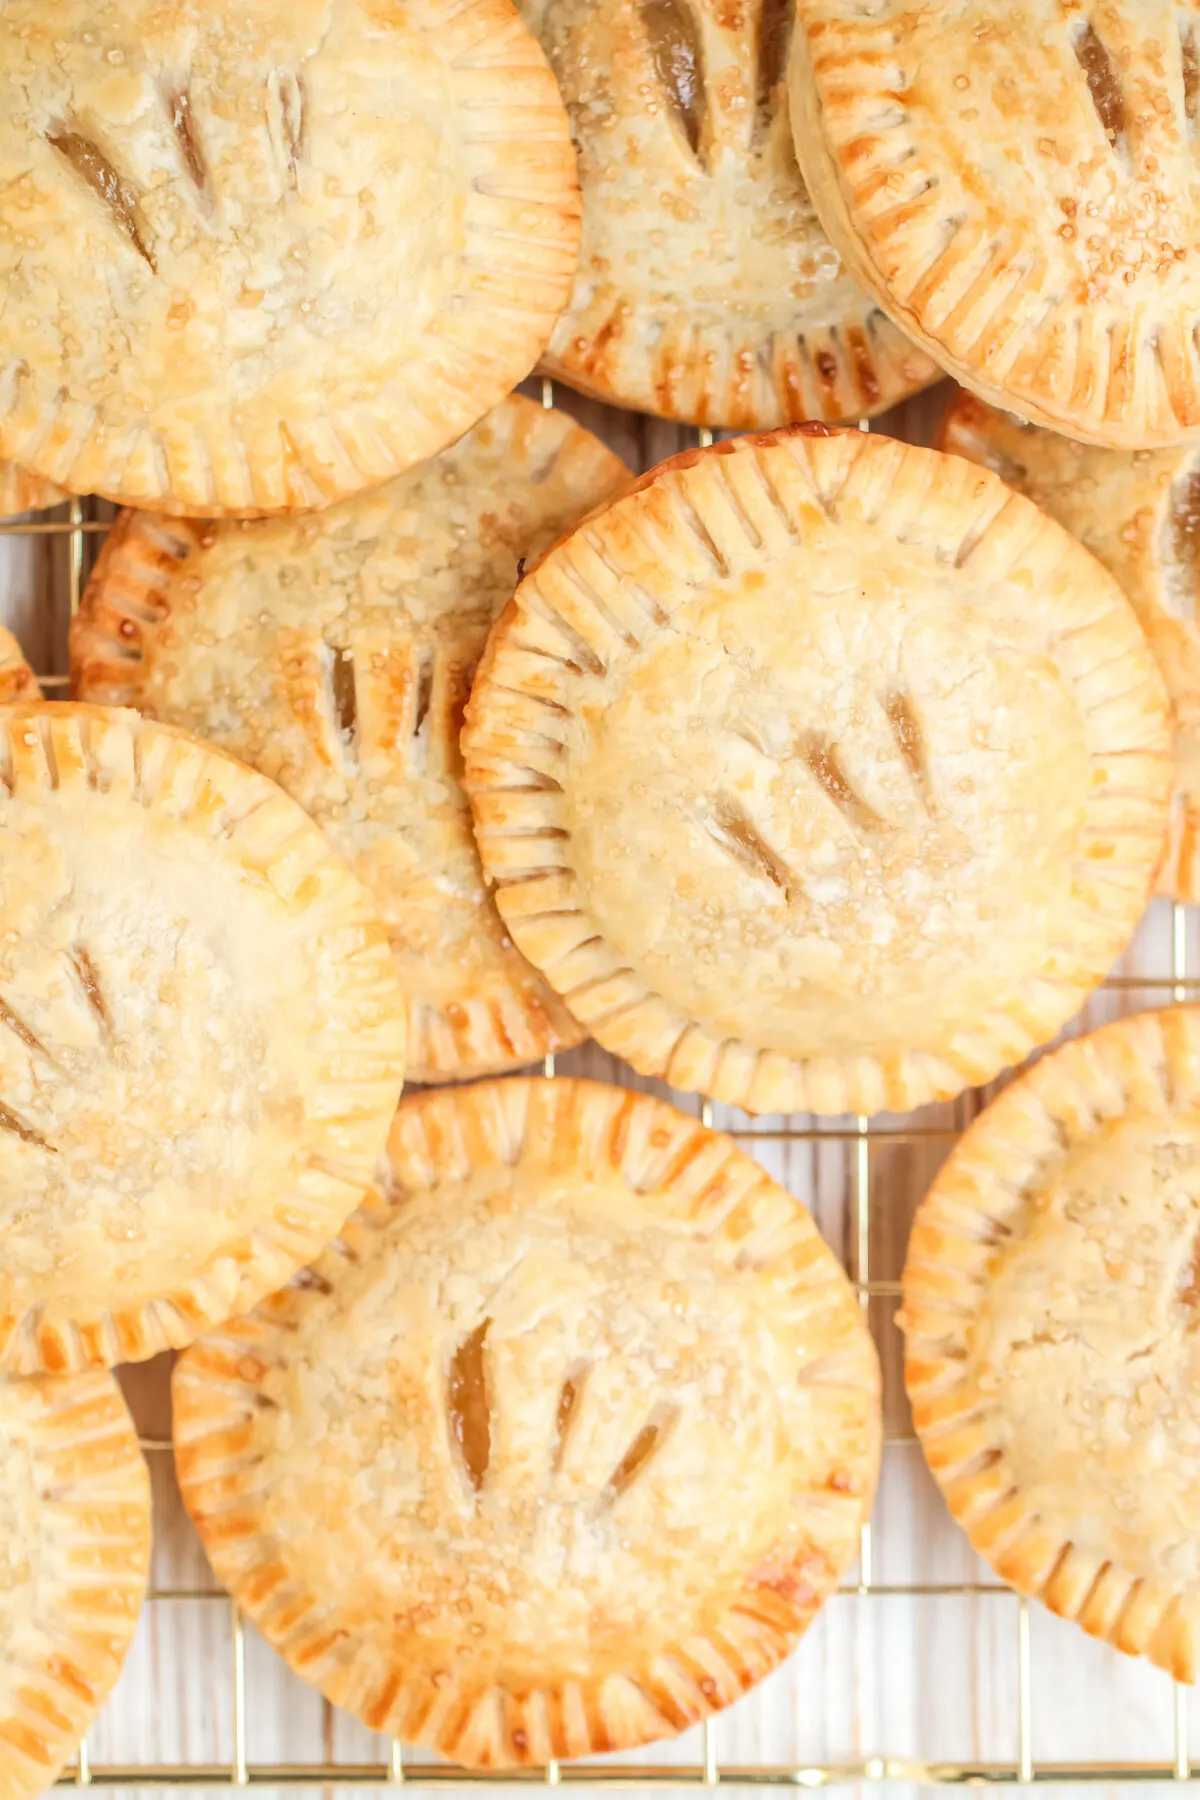 This delicious recipe for apple hand pies is perfect for autumn! These handheld pies are easy to make and perfect for a quick snack or dessert.